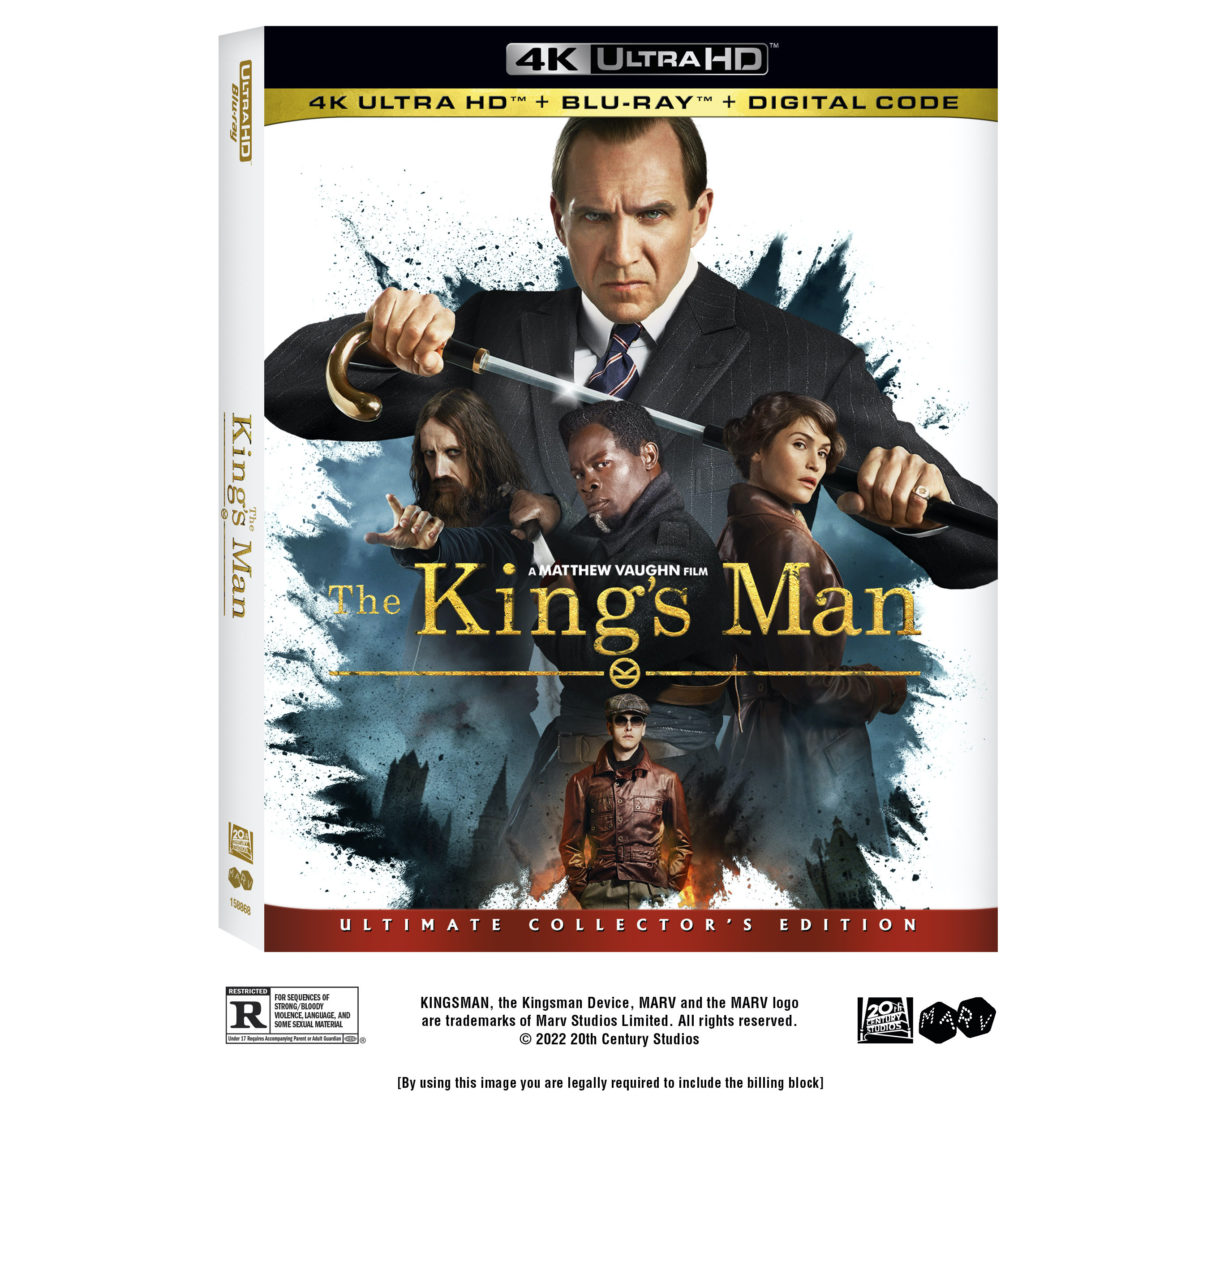 The King's Man 4K Ultra HD Combo Pack cover (Disney Media & Entertainment Distribution)